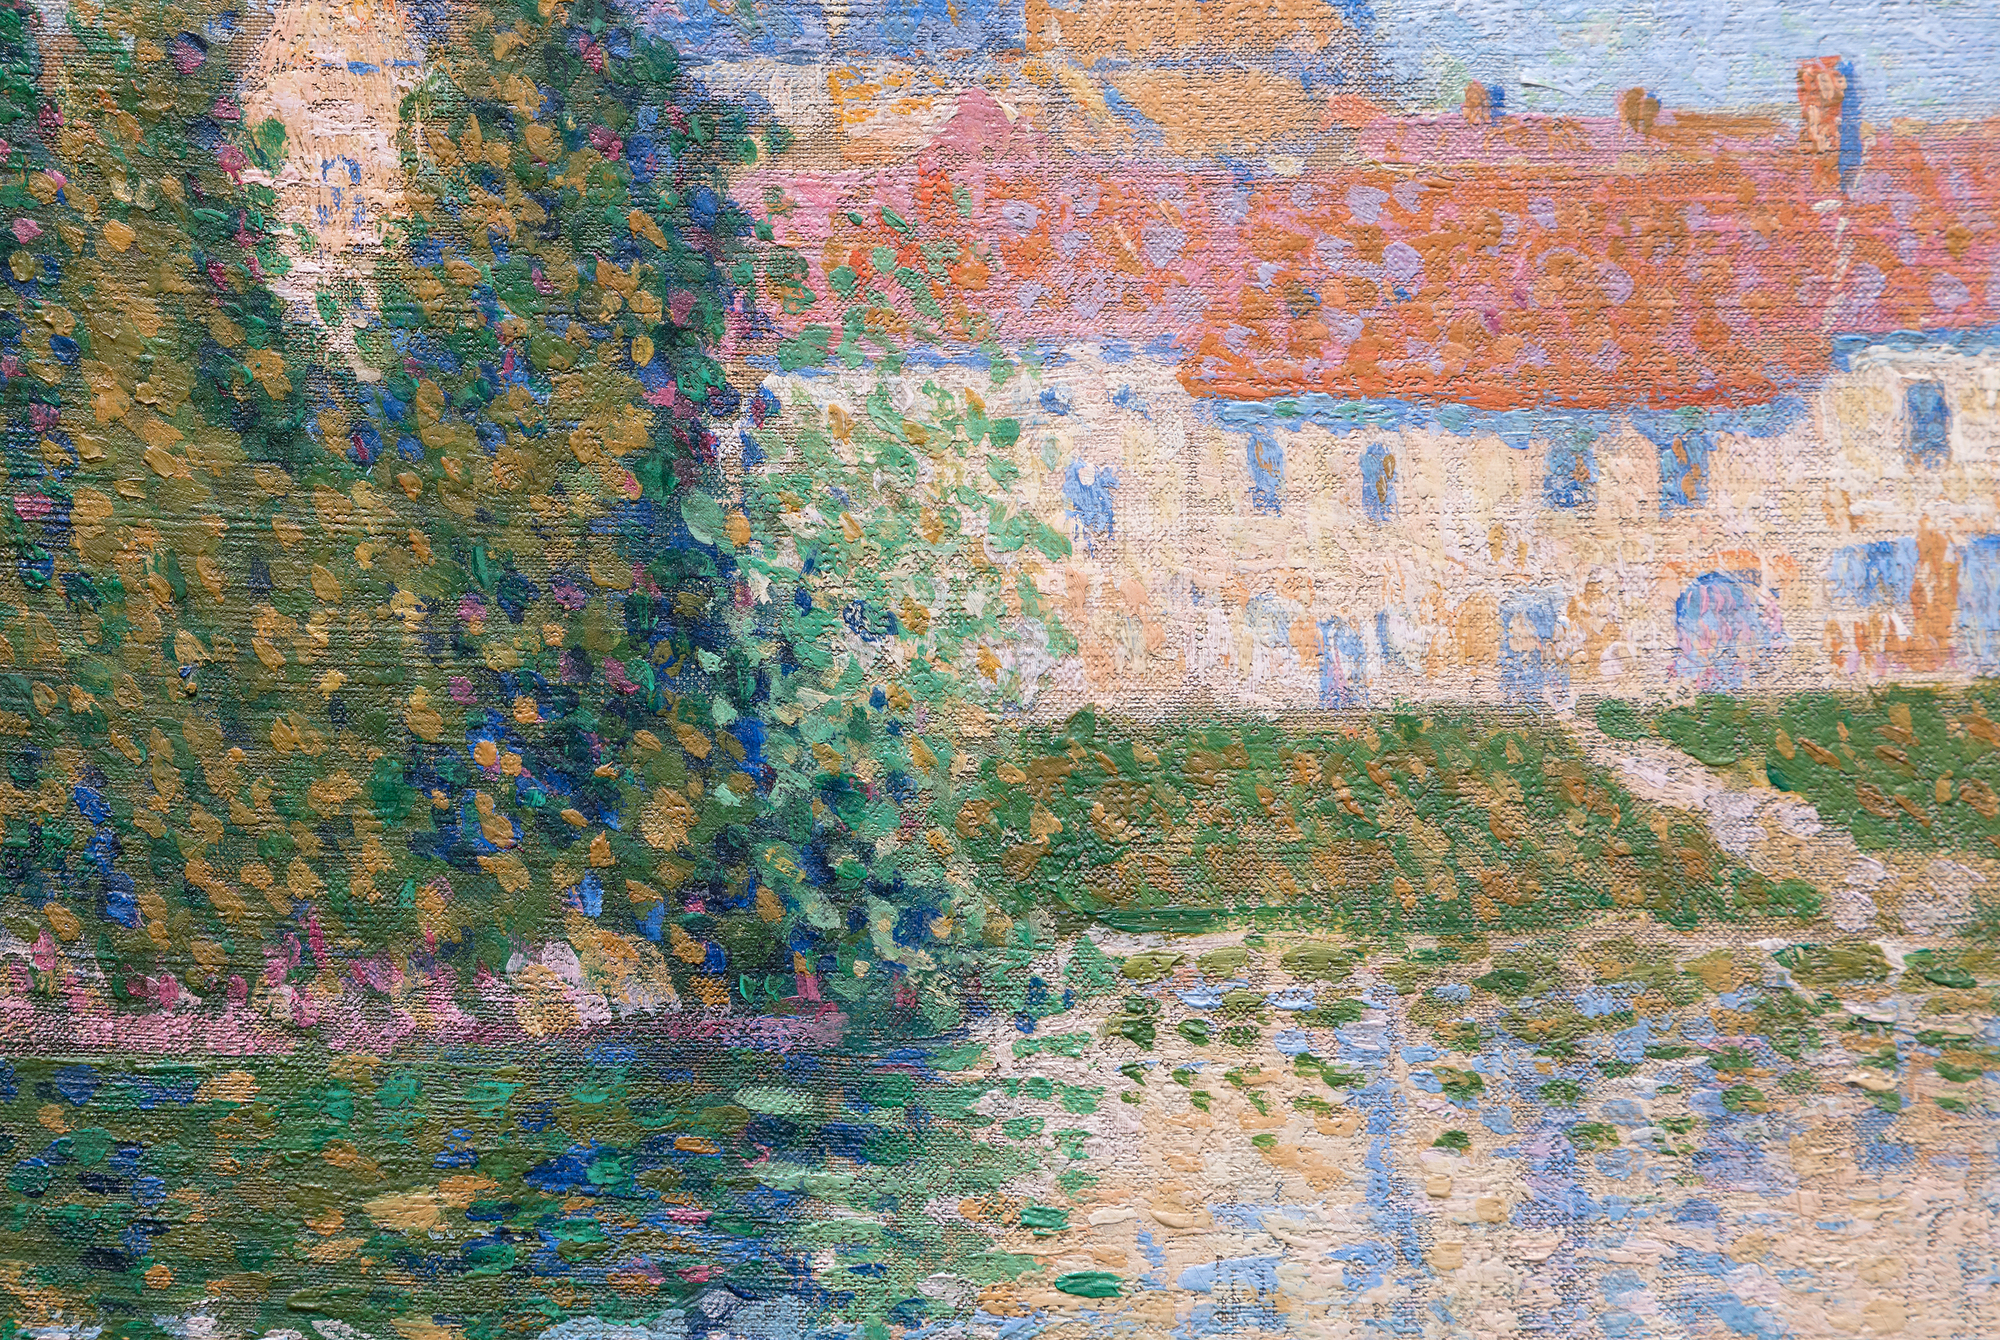 On May 15, 1886, a visual manifesto for a new art movement was born when Georges Seurat’s crowning achievement, A Sunday Afternoon on the Island of La Grande Jatte was unveiled at the Eighth Impressionist Exhibition. Seurat can claim title as the original “Scientific Impressionist” working in a manner that came to be known as Pointillism or Divisionism. It was, however, his friend and the confidant, 24-year-old Paul Signac and their constant dialogue that led to a collaboration in understanding the physics of light and color and the style that emerged. Signac was an untrained, yet a blazingly talented, Impressionist painter whose temperament was perfectly suited to the rigor and discipline required to achieve the painstakingly laborious brushwork and color. Signac quickly assimilated the technique. He also bore witness to Seurat’s arduous two-year journey building myriad layers of unblended dots of color on the colossally-sized La Grande Jatte. Together, Signac, the brash extrovert, and Seurat, a secretive introvert, were about to subvert the course of Impressionism, and change the course of modern art.